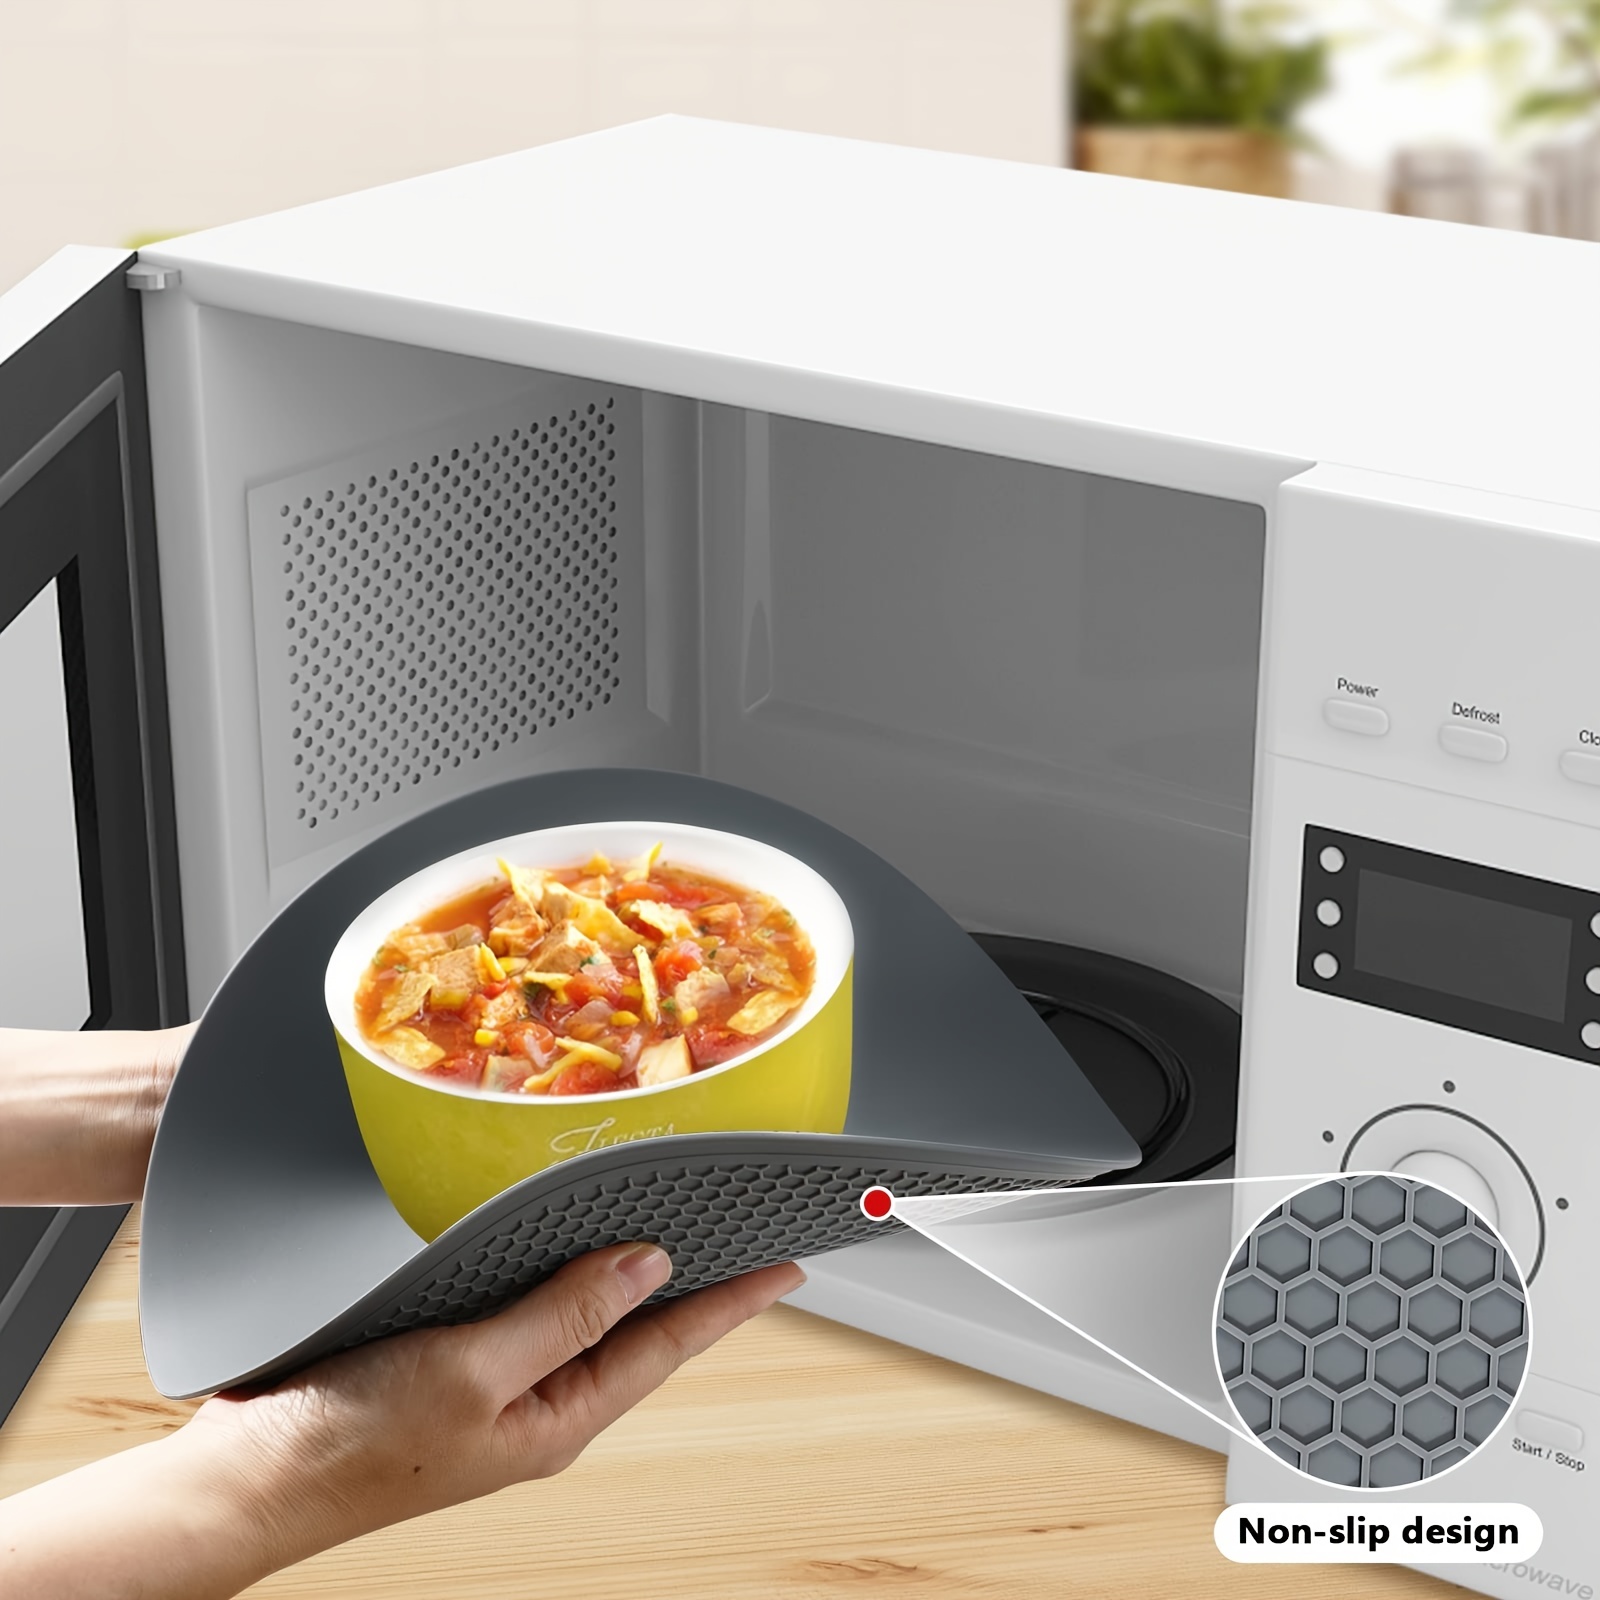  Microwave Plate Cover (12): Home & Kitchen